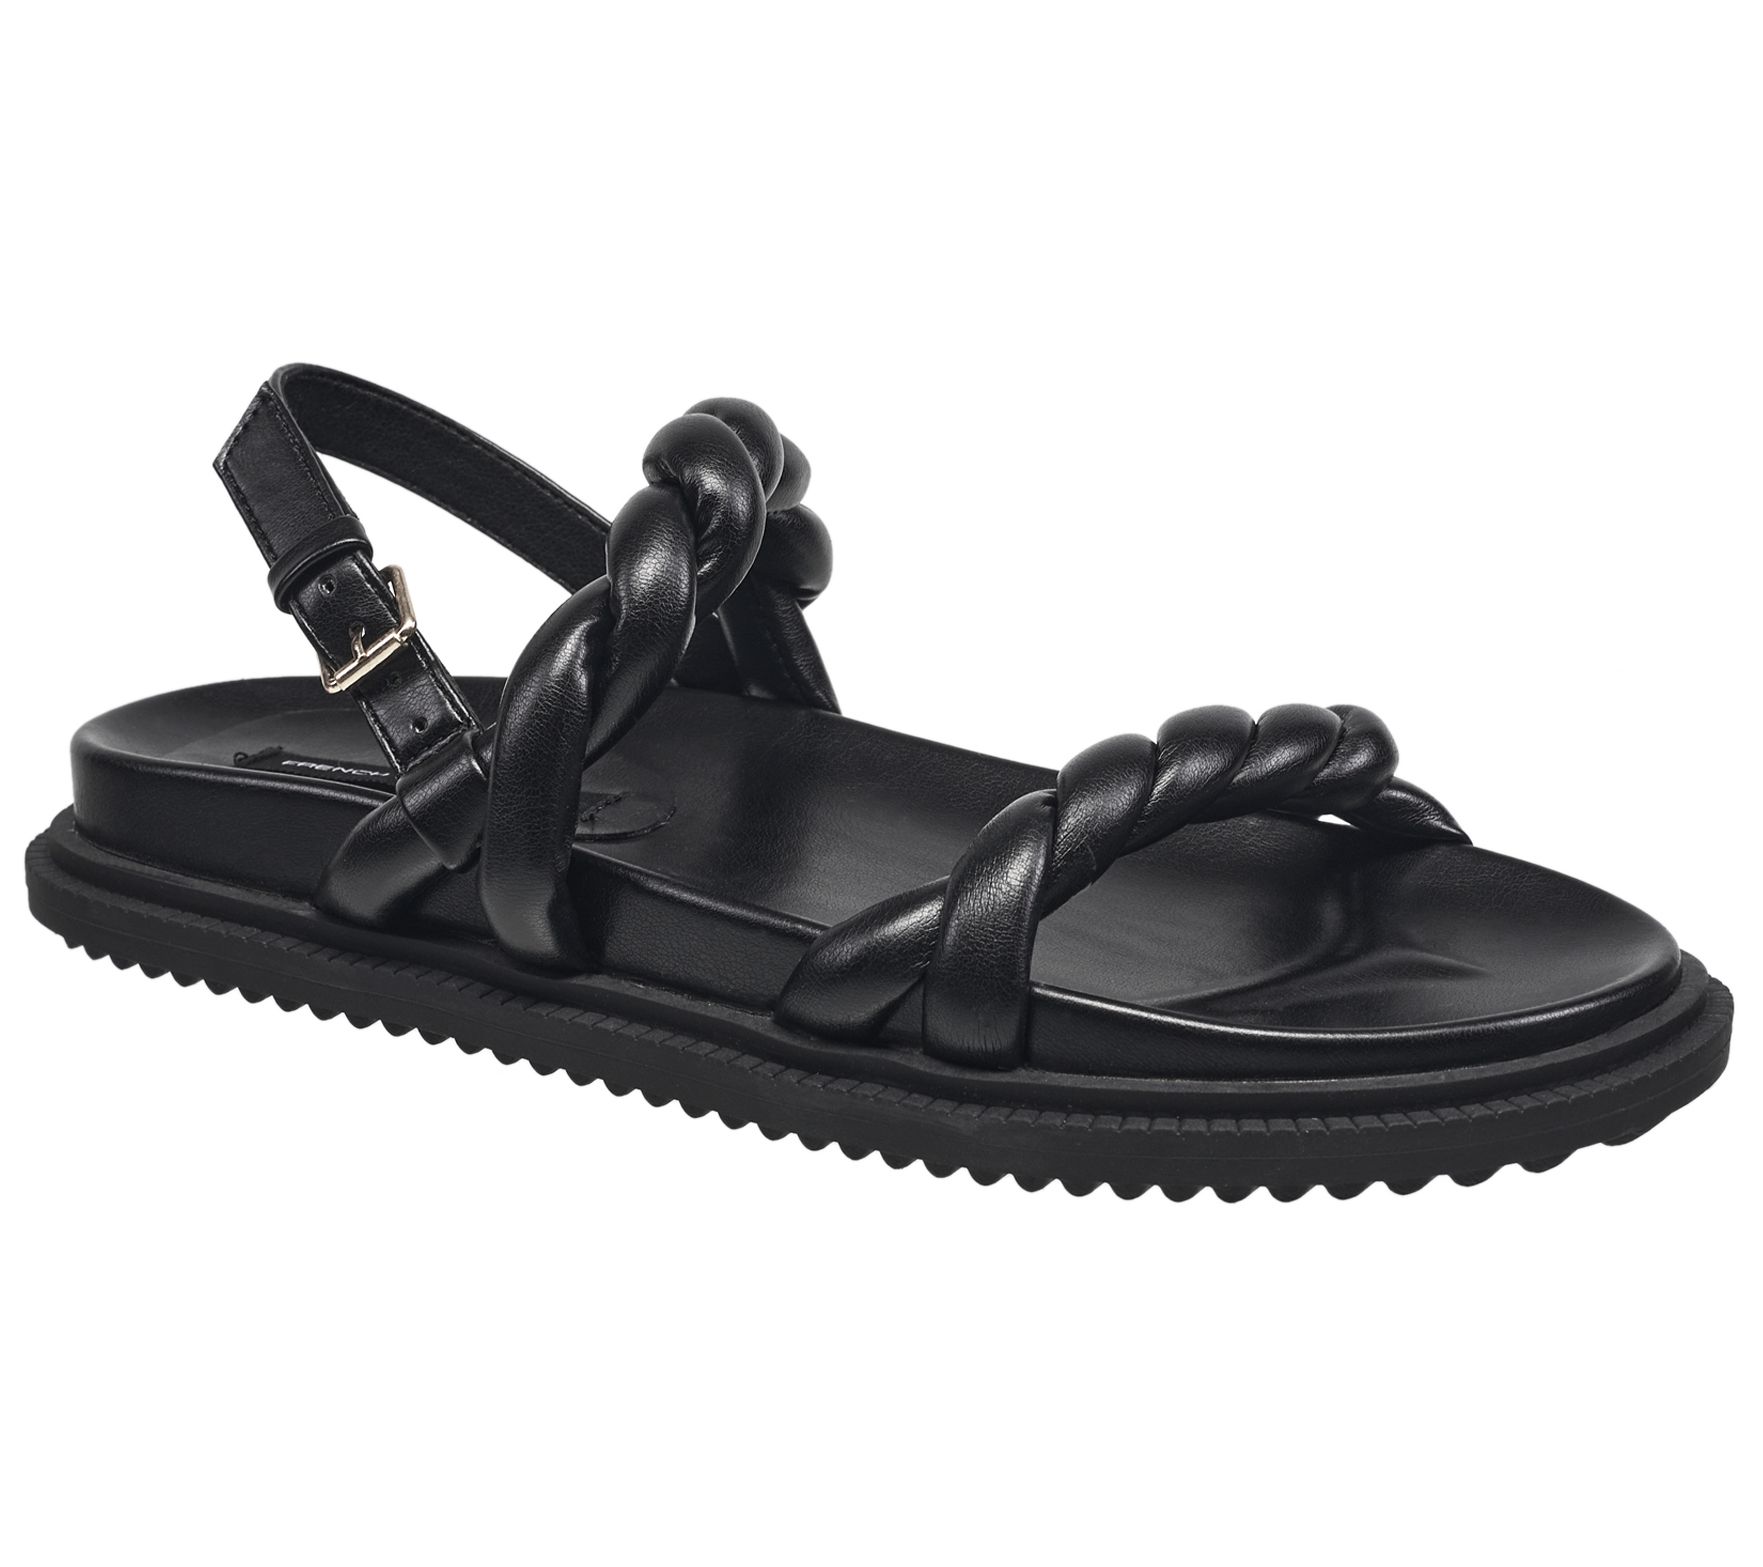 French Connection Brieanne Braided Sandal